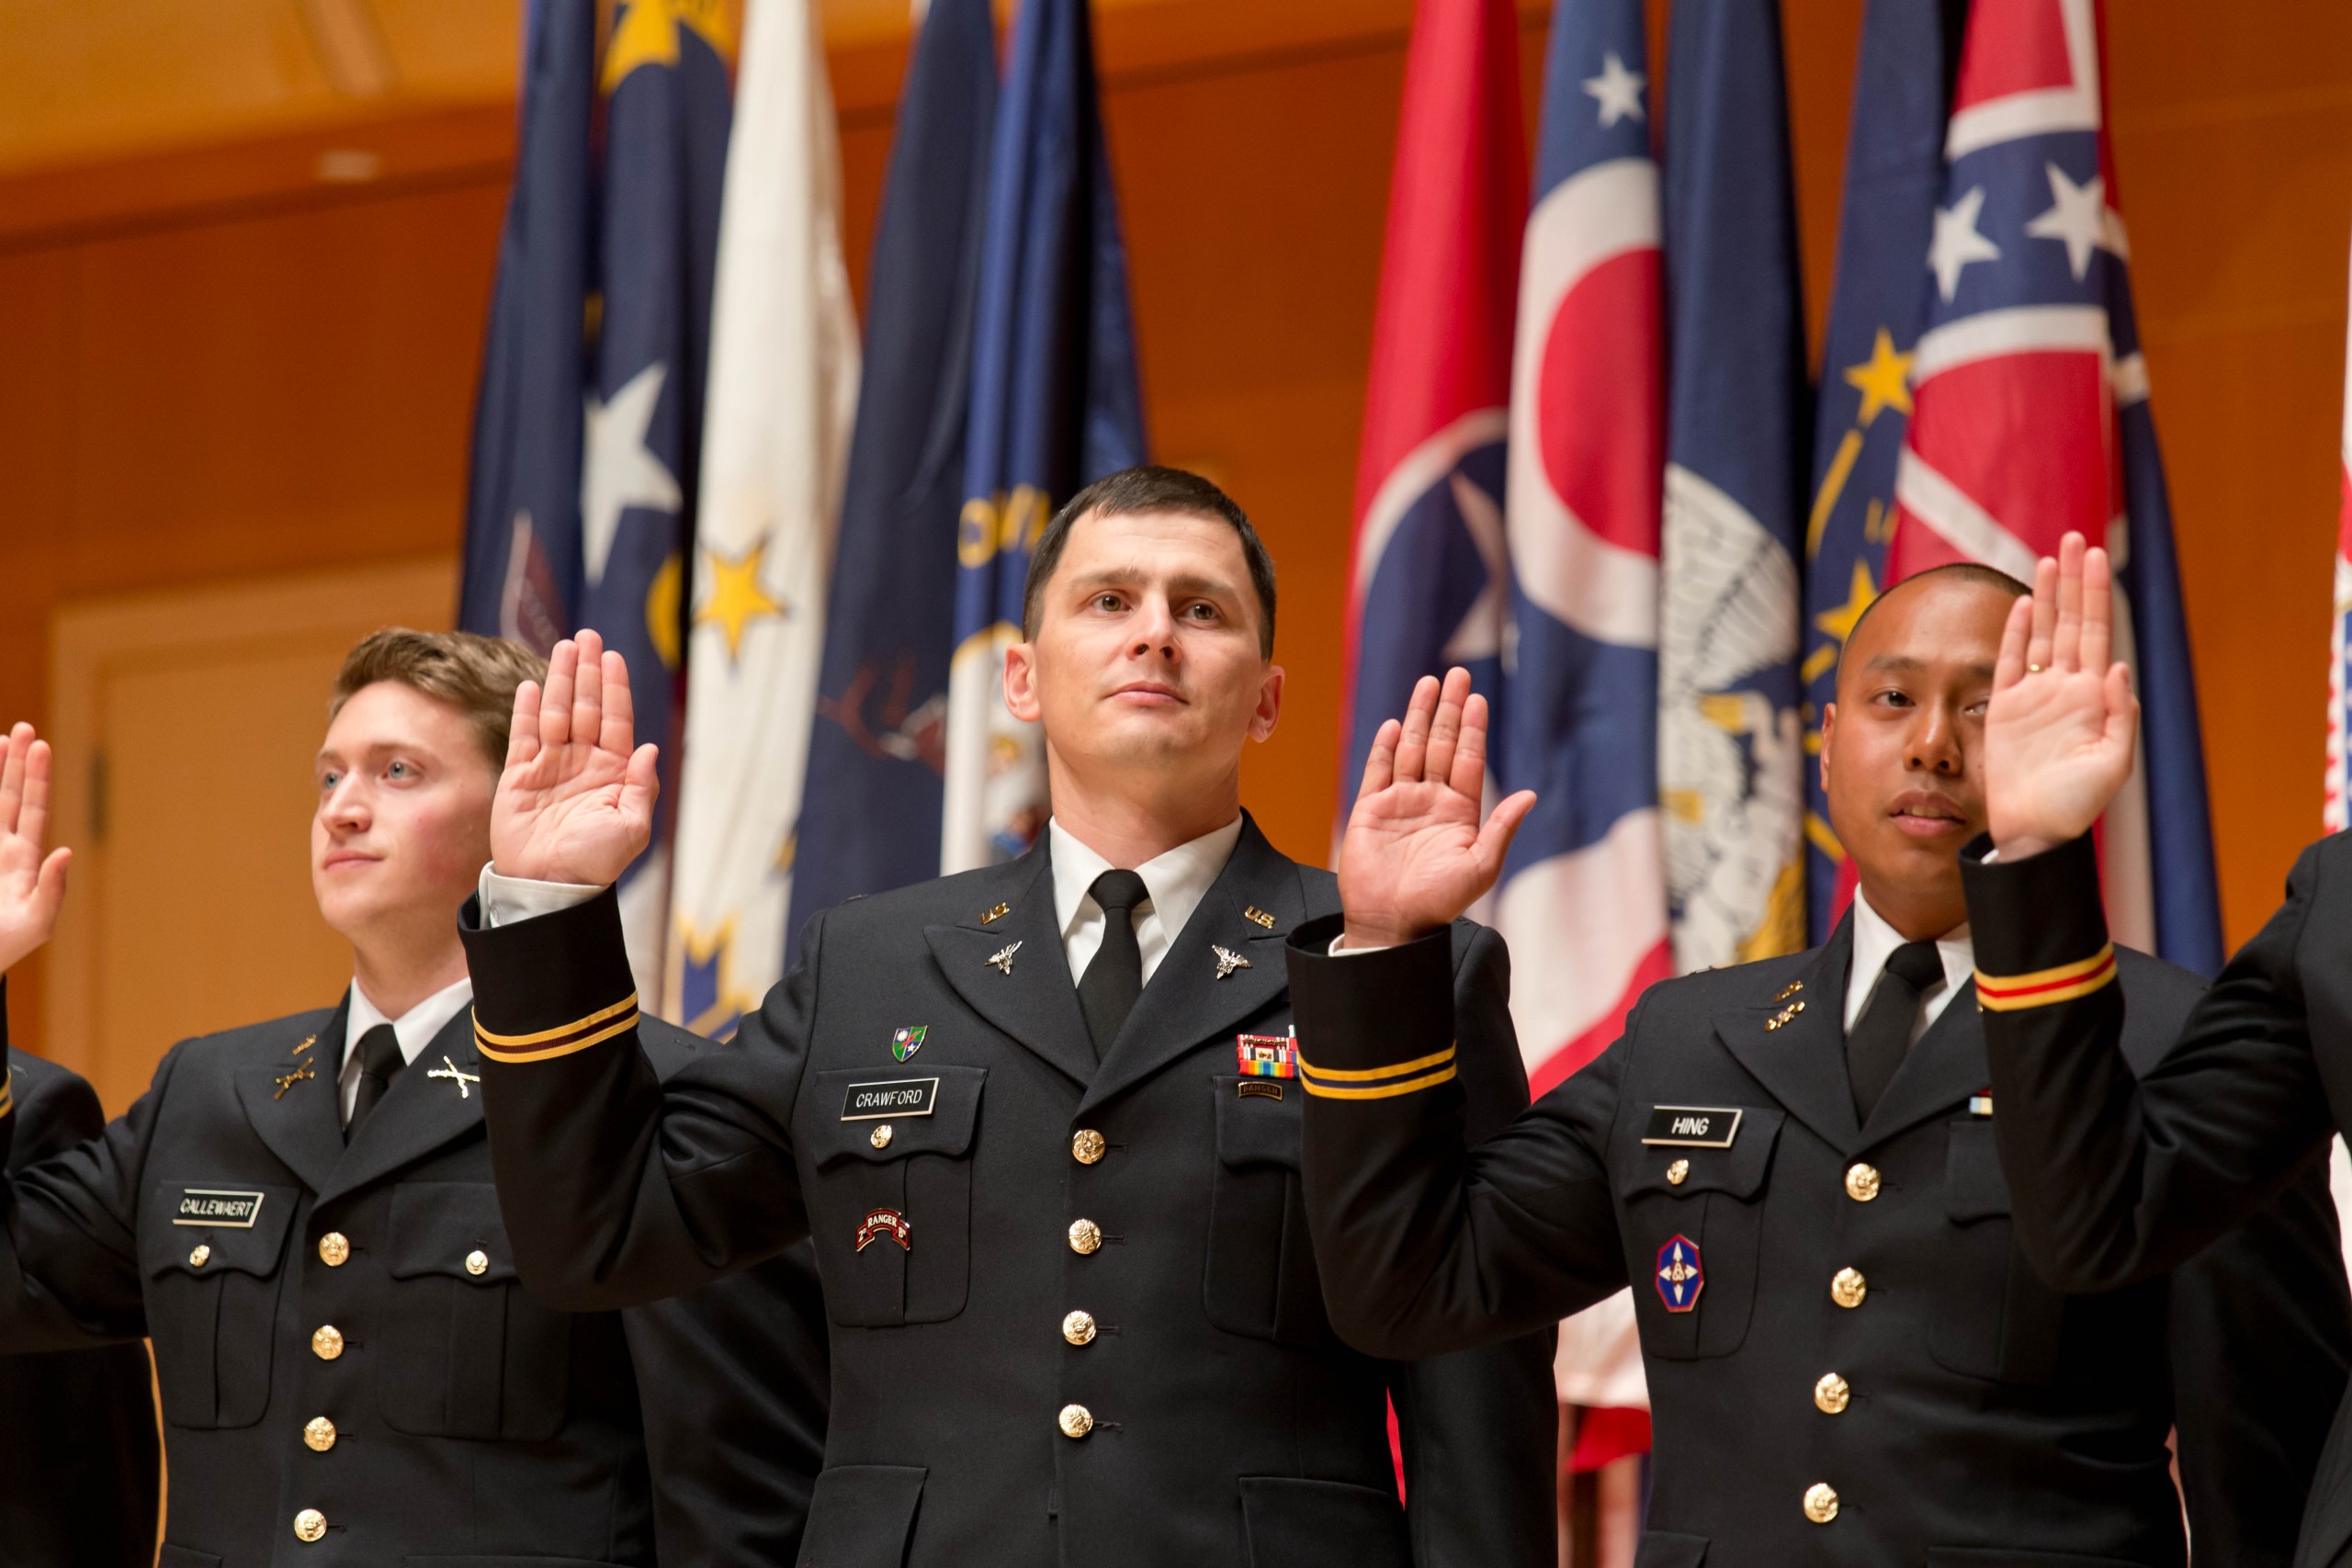 ROTC commissioning at PLU on Thursday, May 26, 2016. (Photo: John Froschauer/PLU)